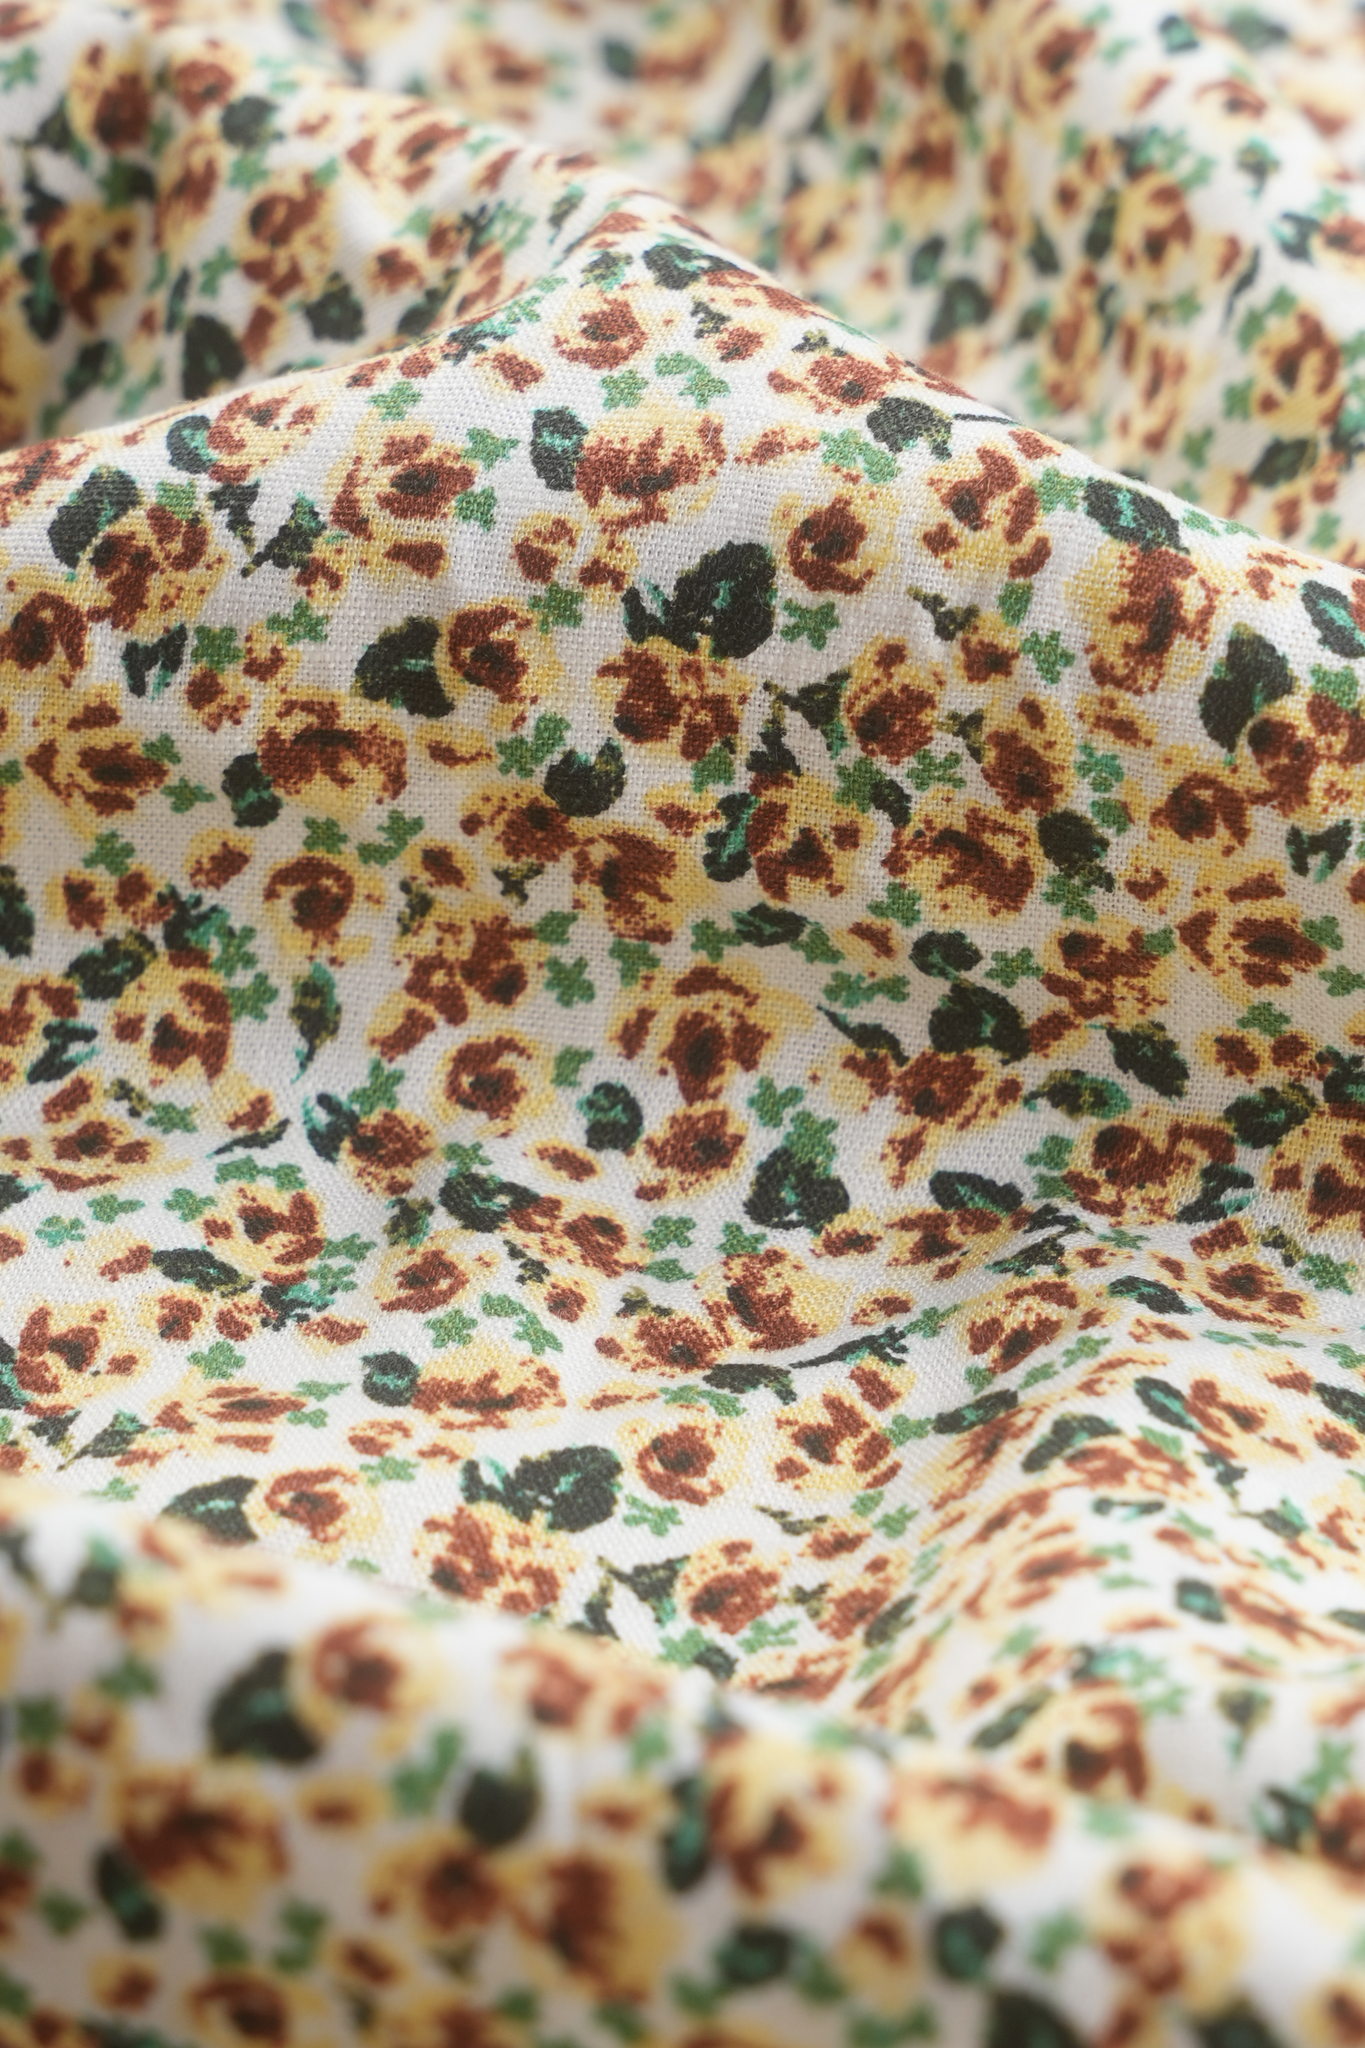 This is a close-up photo of the fabric of The Cascade Skirt. It is made of a luxurious cotton-linen blend, is 100% machine washable, and has a beautiful pastel yellow and green floral print.